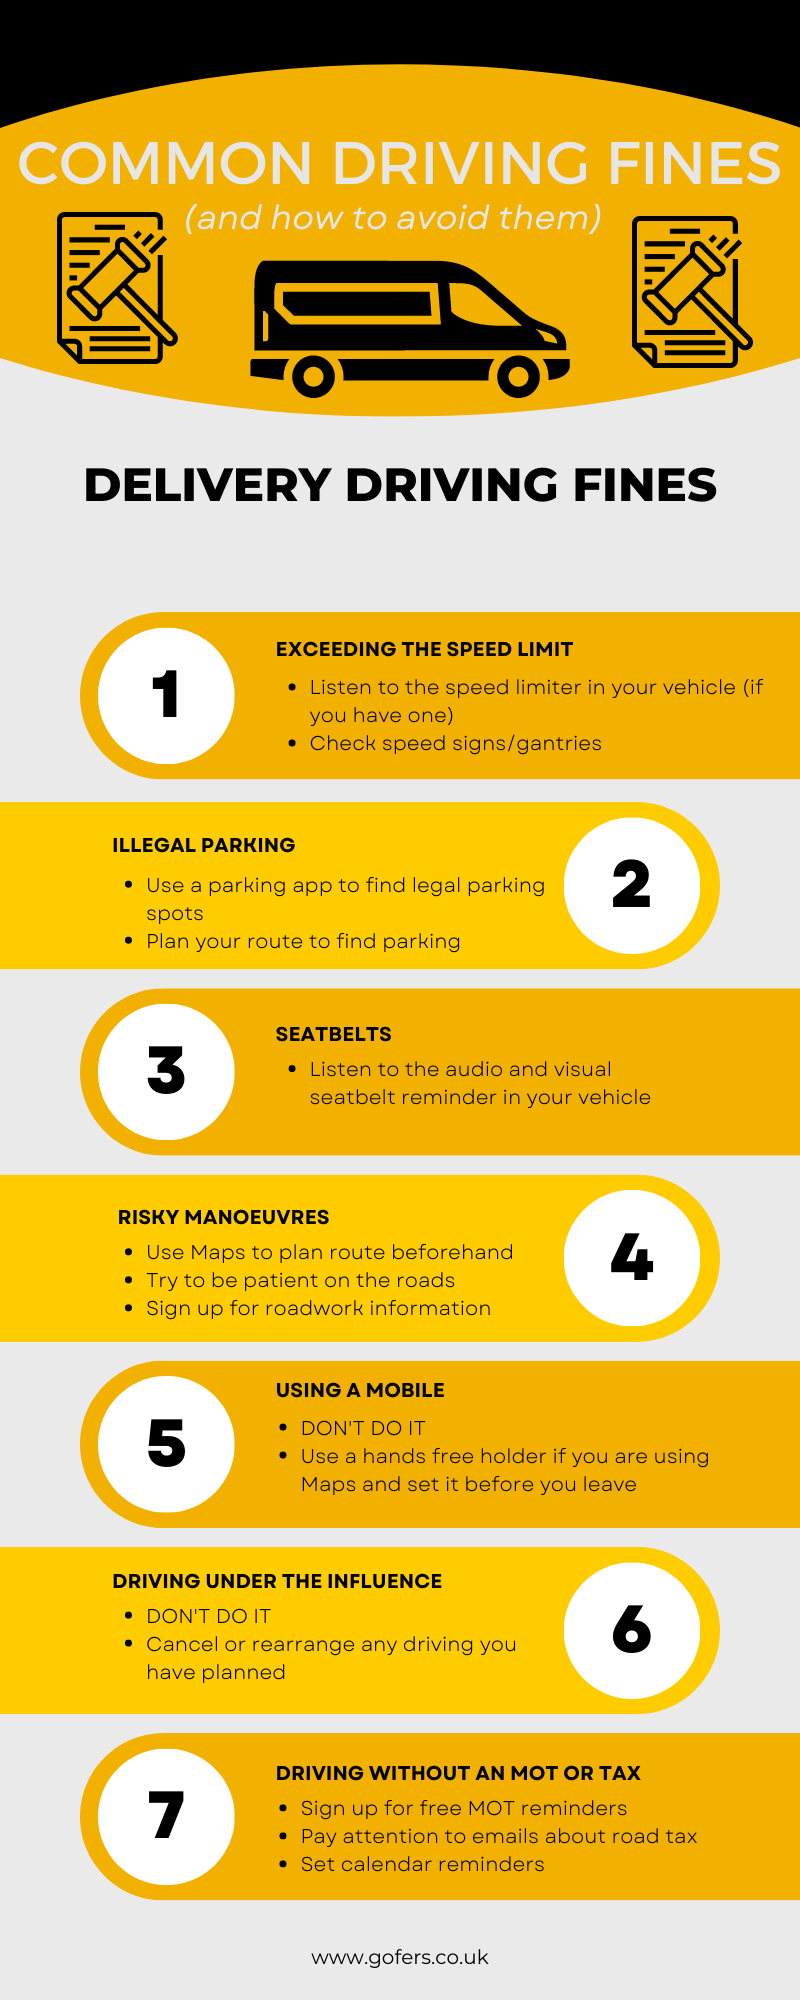 Gofers driving fines infographic